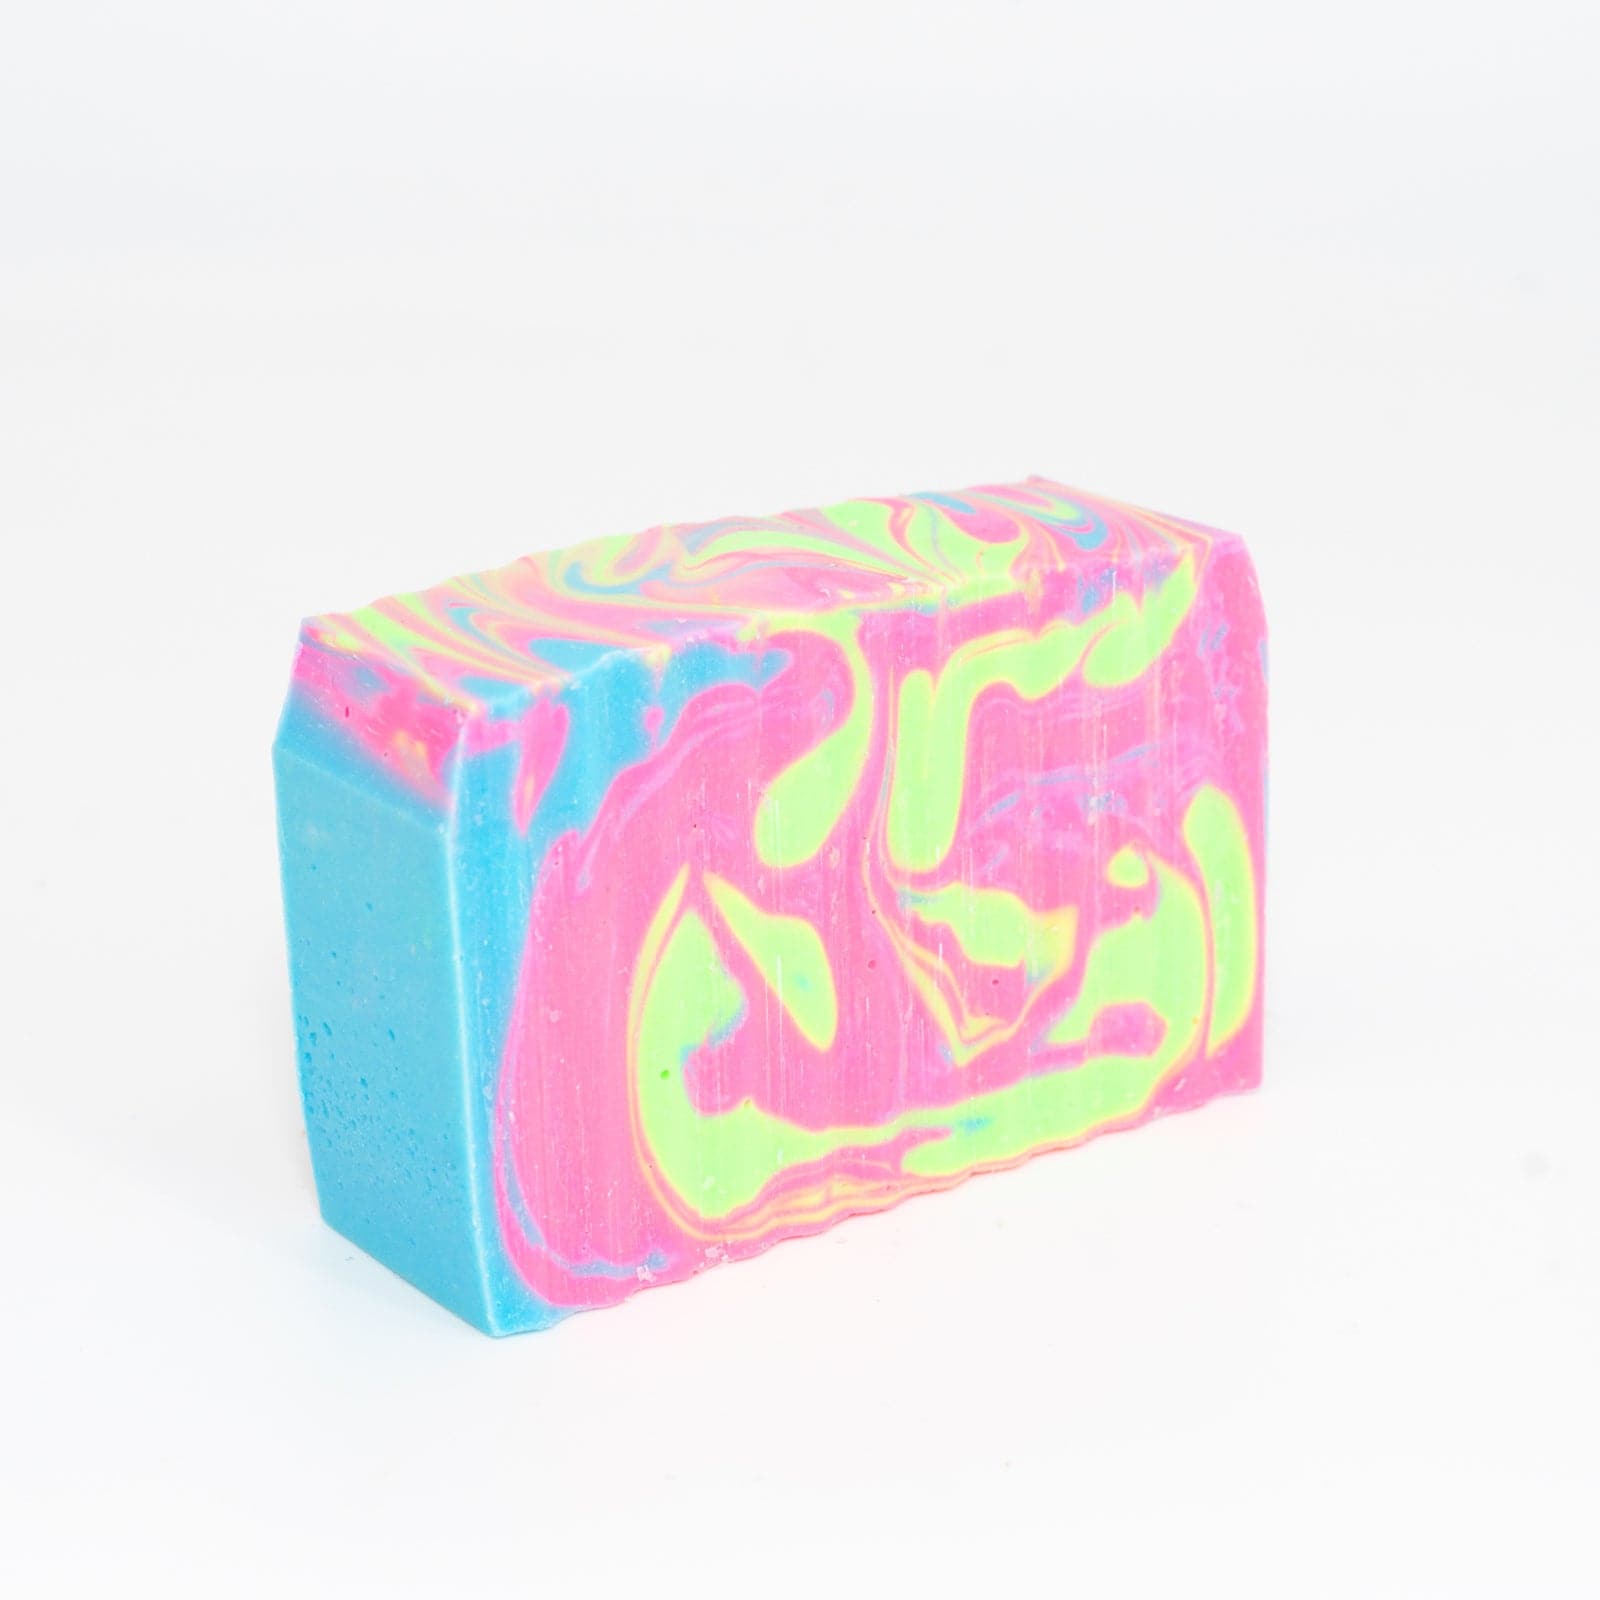 Sour Candies Soap Bar on side